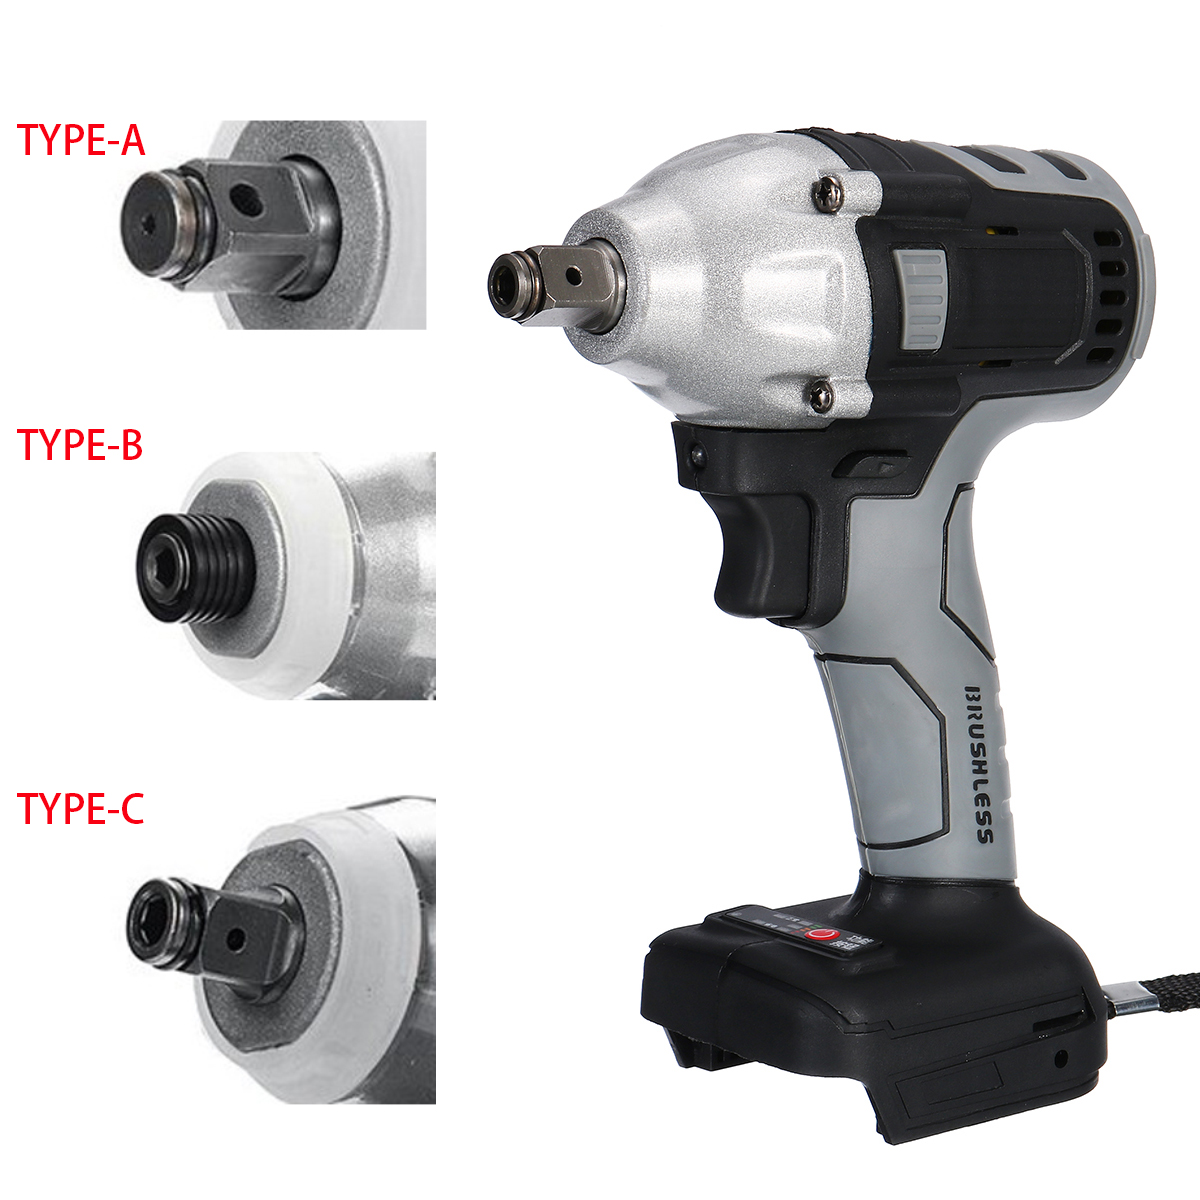 Gray-Cordless-Brushless-Impact-Wrench-Drill-Drive-Machine-For-Makita-18V-Battery-1769332-3